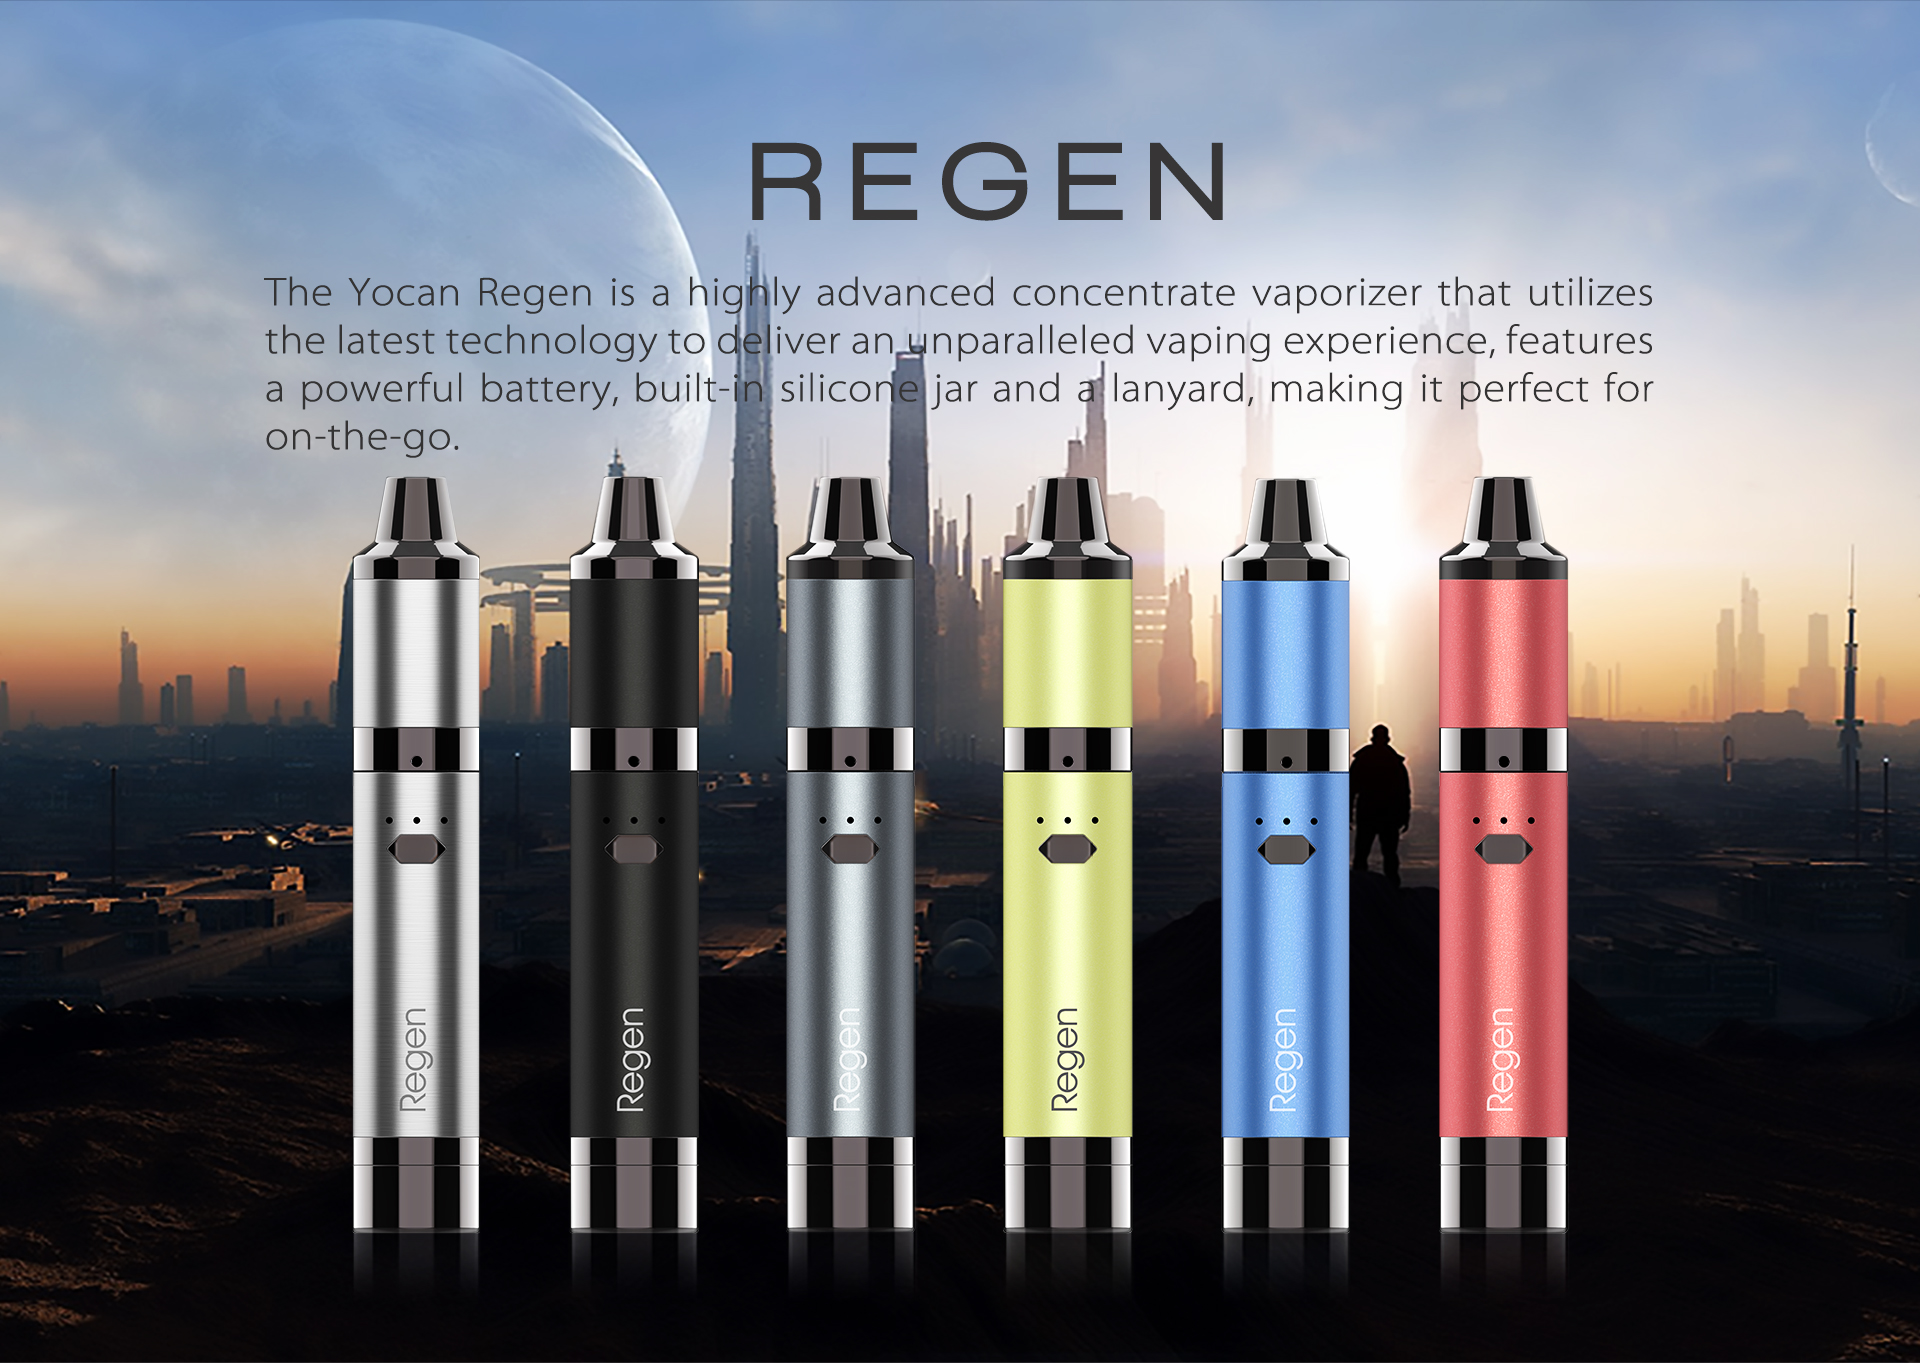 The Yocan Regen is a highly advanced concentrate vaporizer.